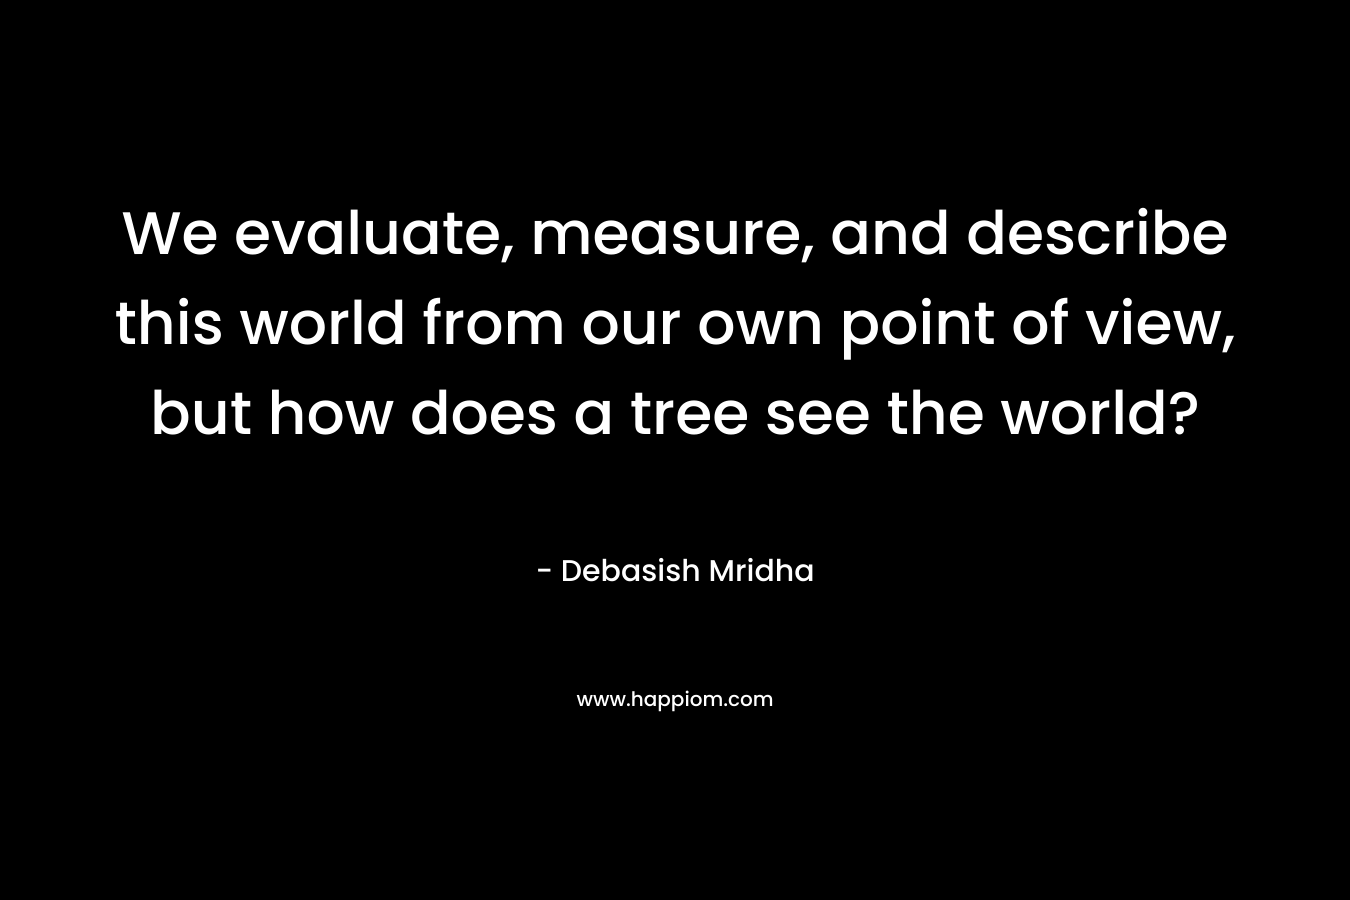 We evaluate, measure, and describe this world from our own point of view, but how does a tree see the world?